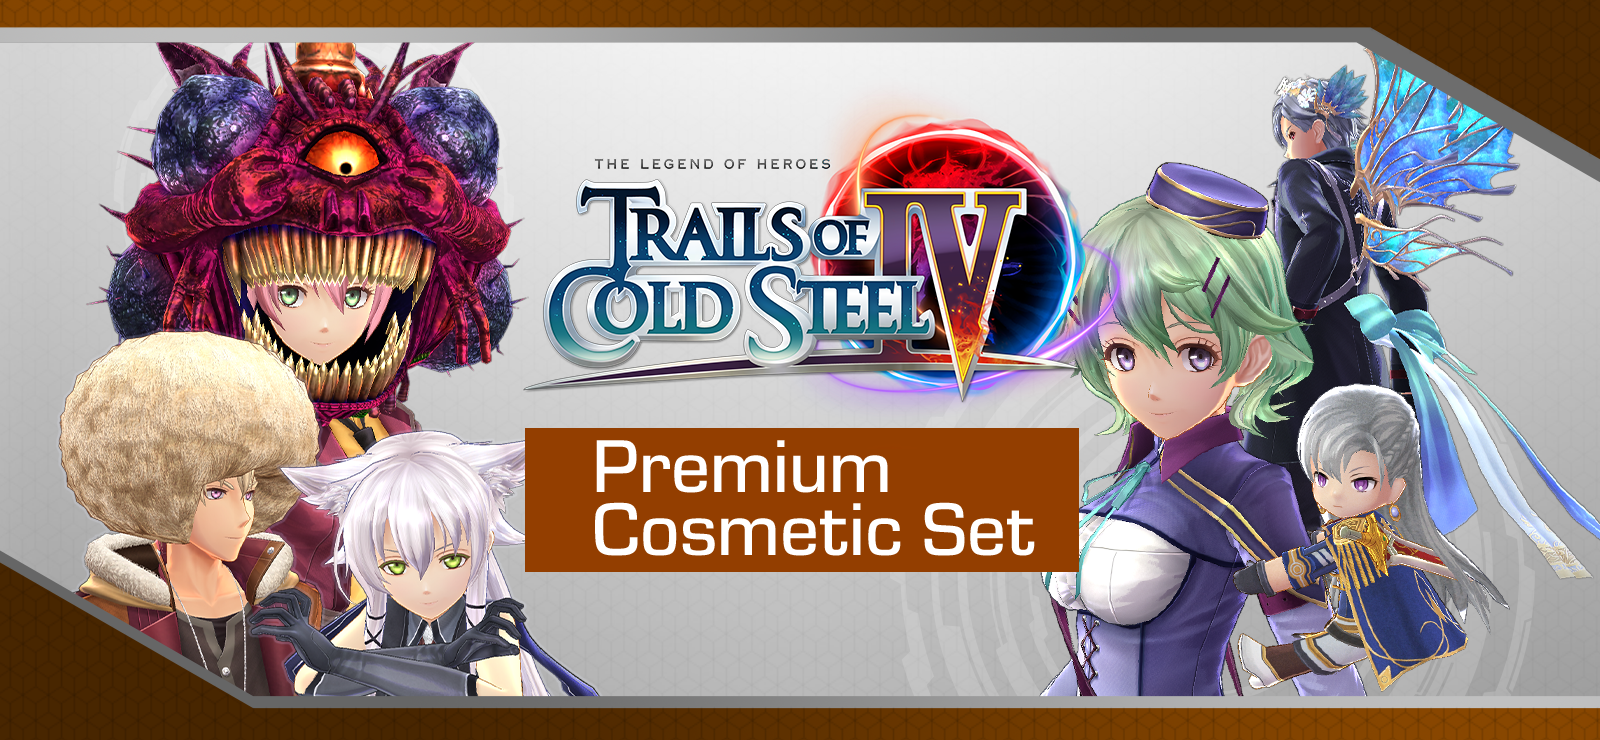 The Legend Of Heroes: Trails Of Cold Steel IV - Premium Cosmetic Set